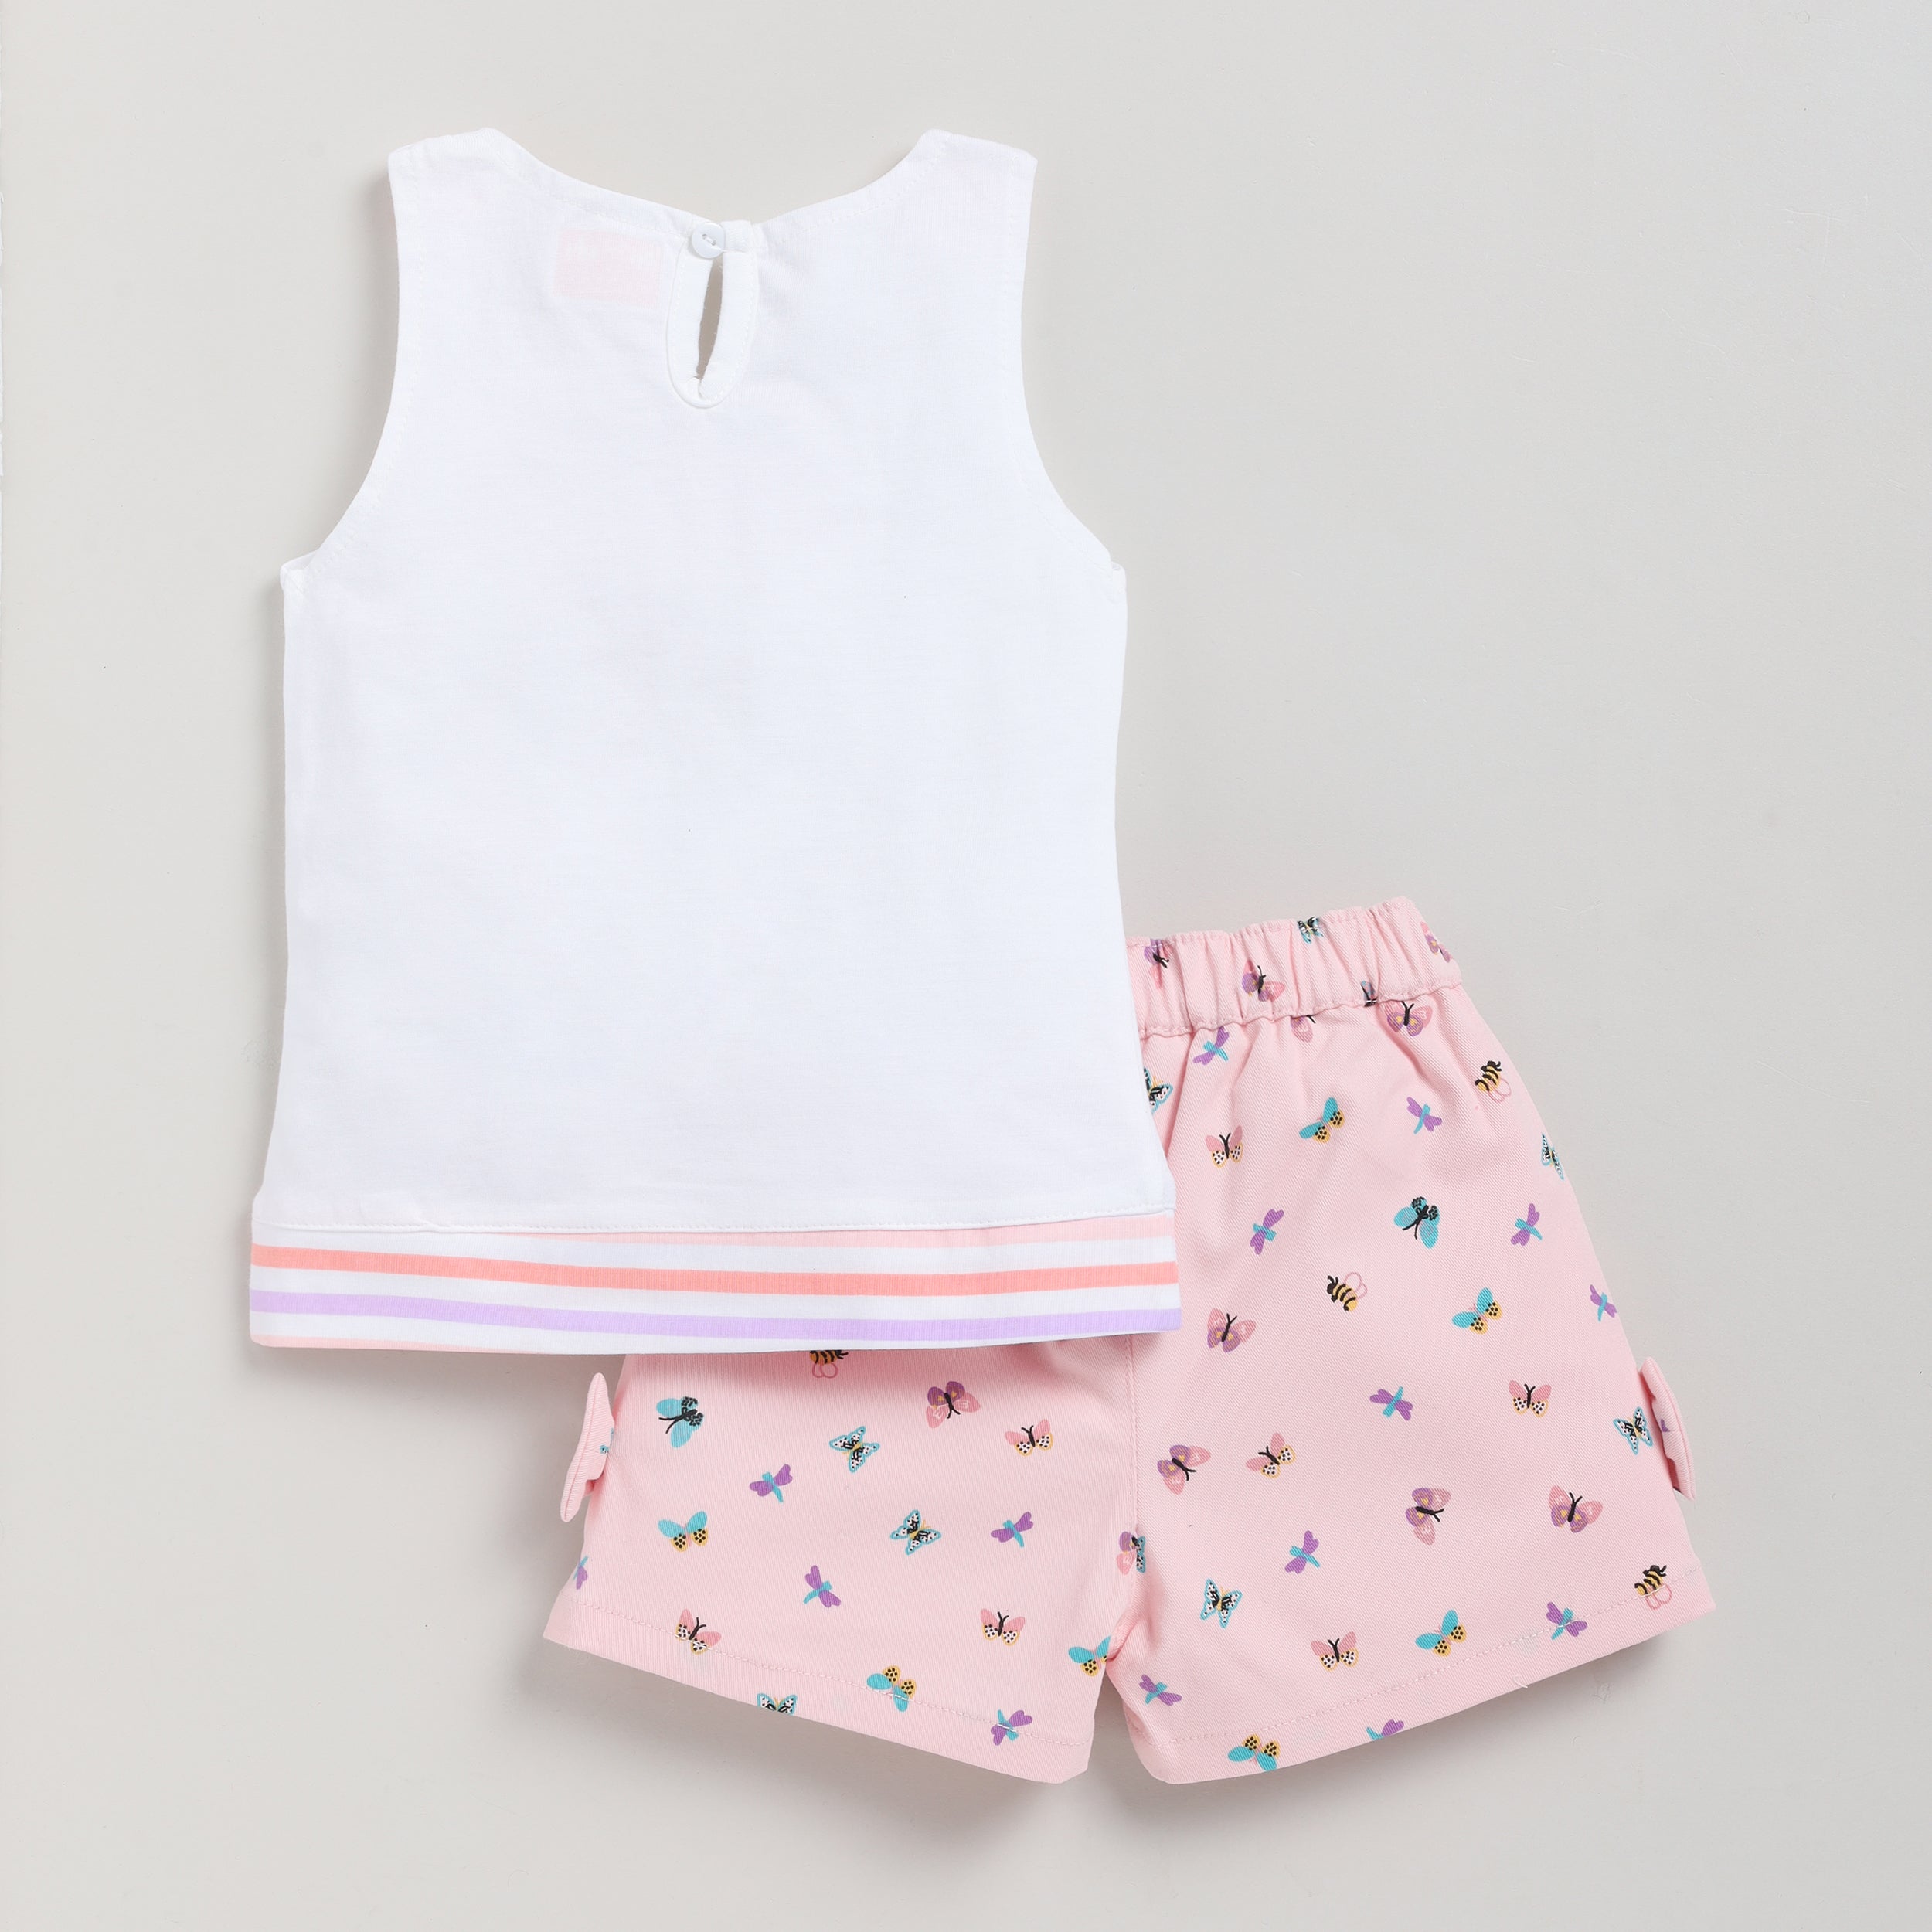 Snuggly Monkey Butterly Design Top with Shorts for Summer - Pink